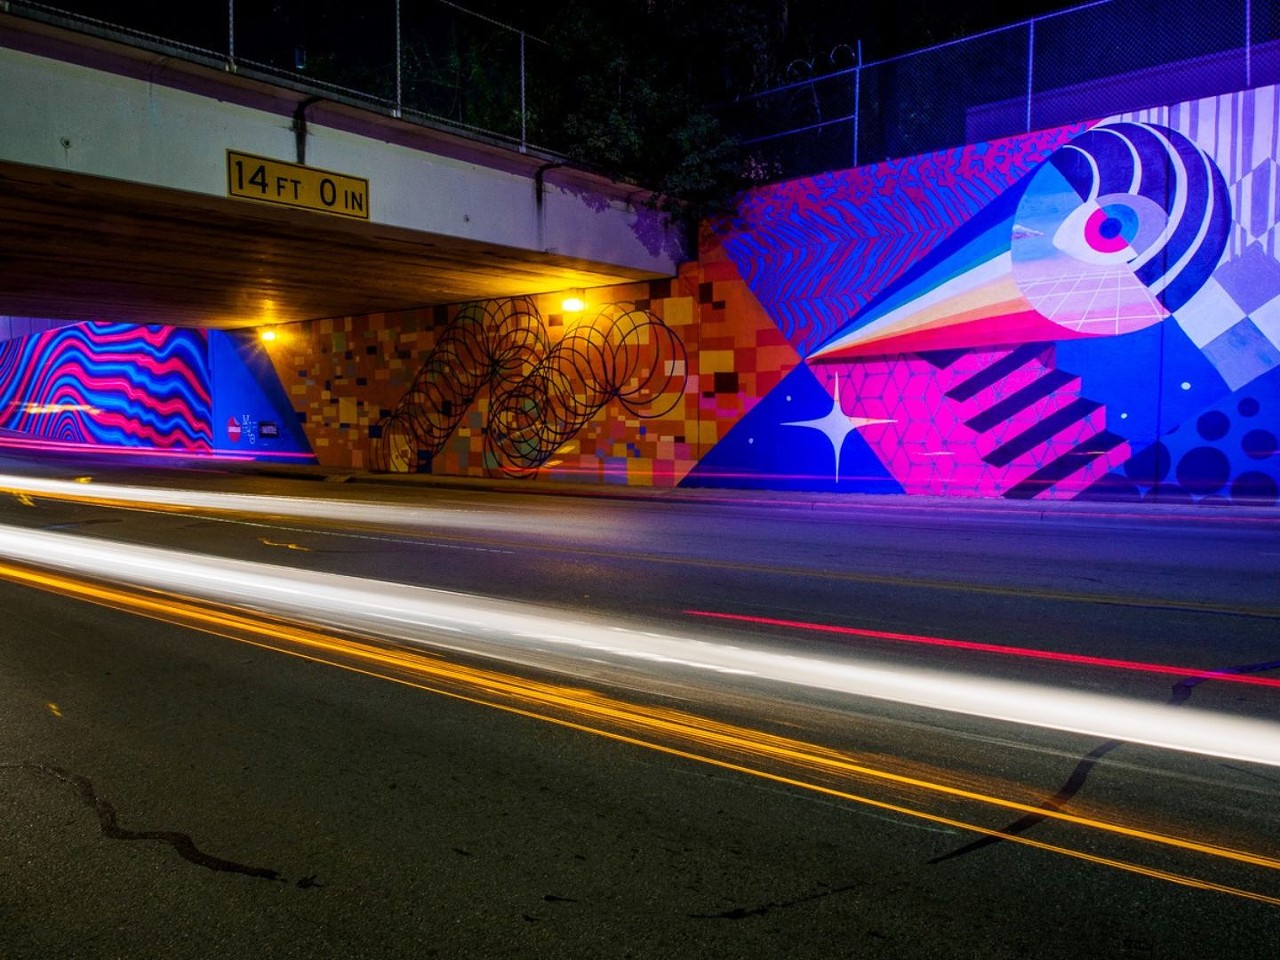 Neon Drive
401-405 Nolan St.
Artist: Iker Muro
A mural spanning 300 feet on the Nolan Street underpass, the art has an abstract focus on reflected light in a variety of colors. Created by Canary Islands-based artist Iker Muro, the mural complements another mural project on a different section of the underpass, by artist Alex Rubio.